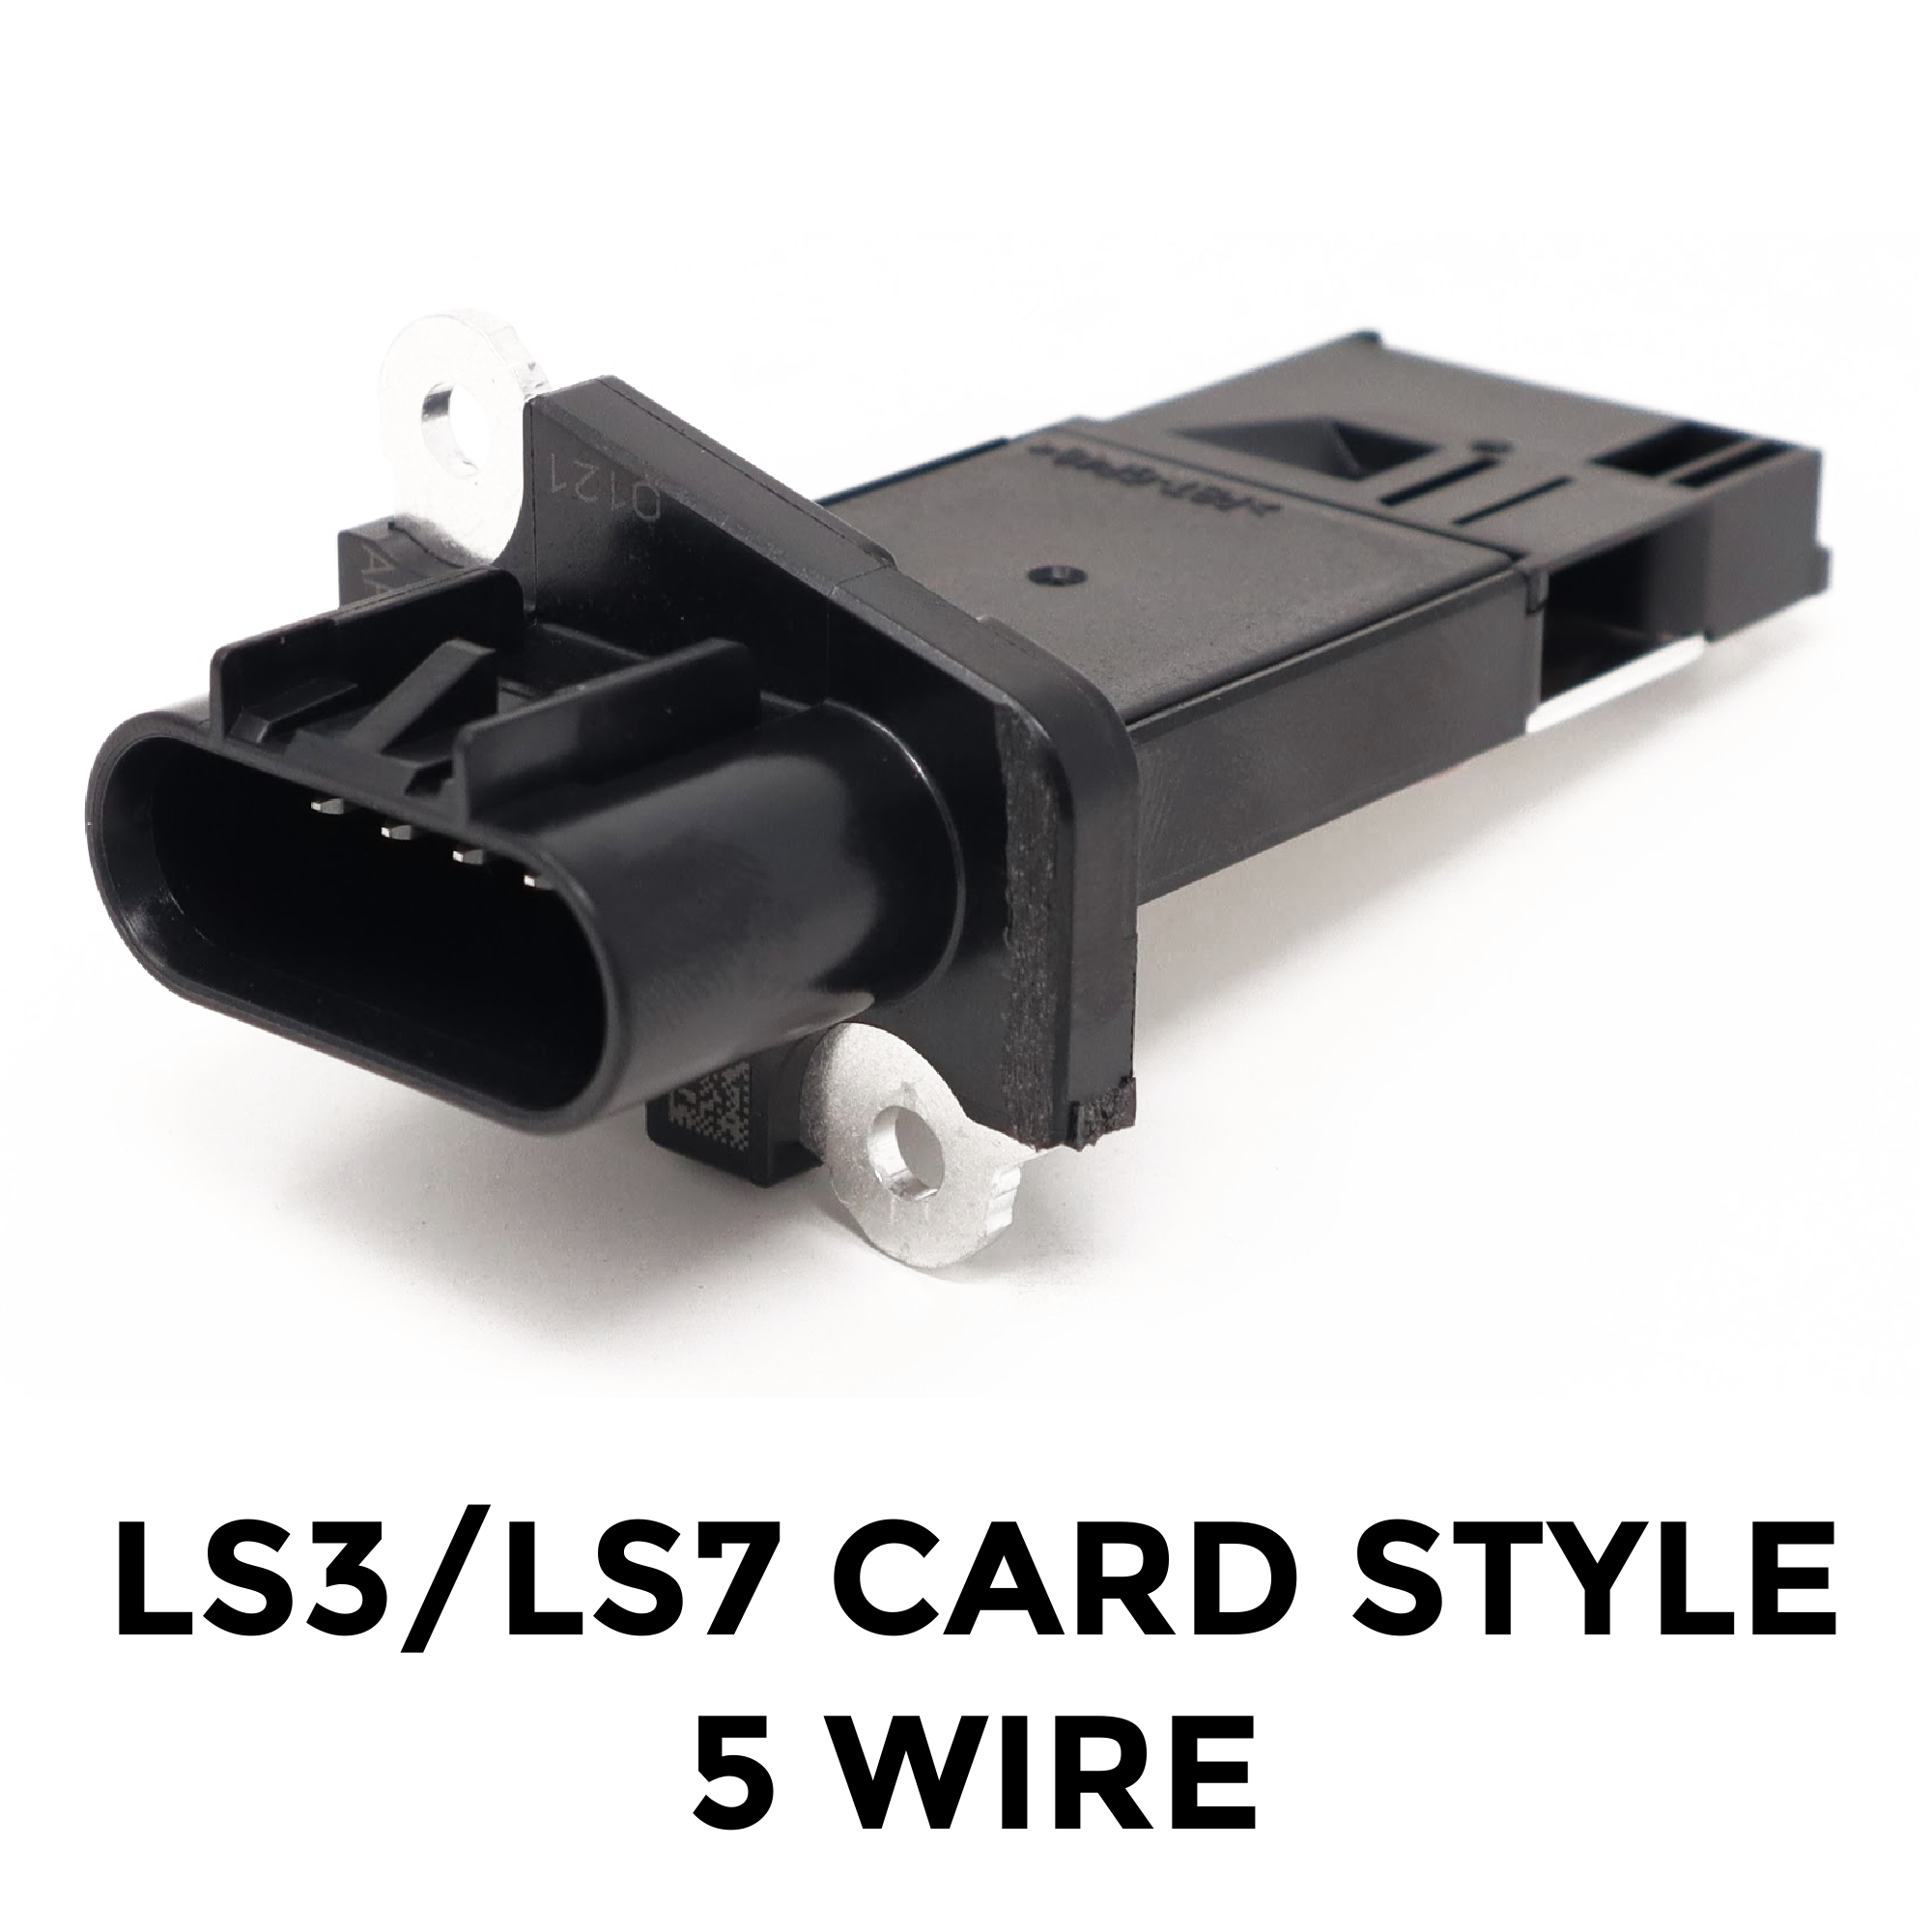 LS3 Card Style 5 Wire